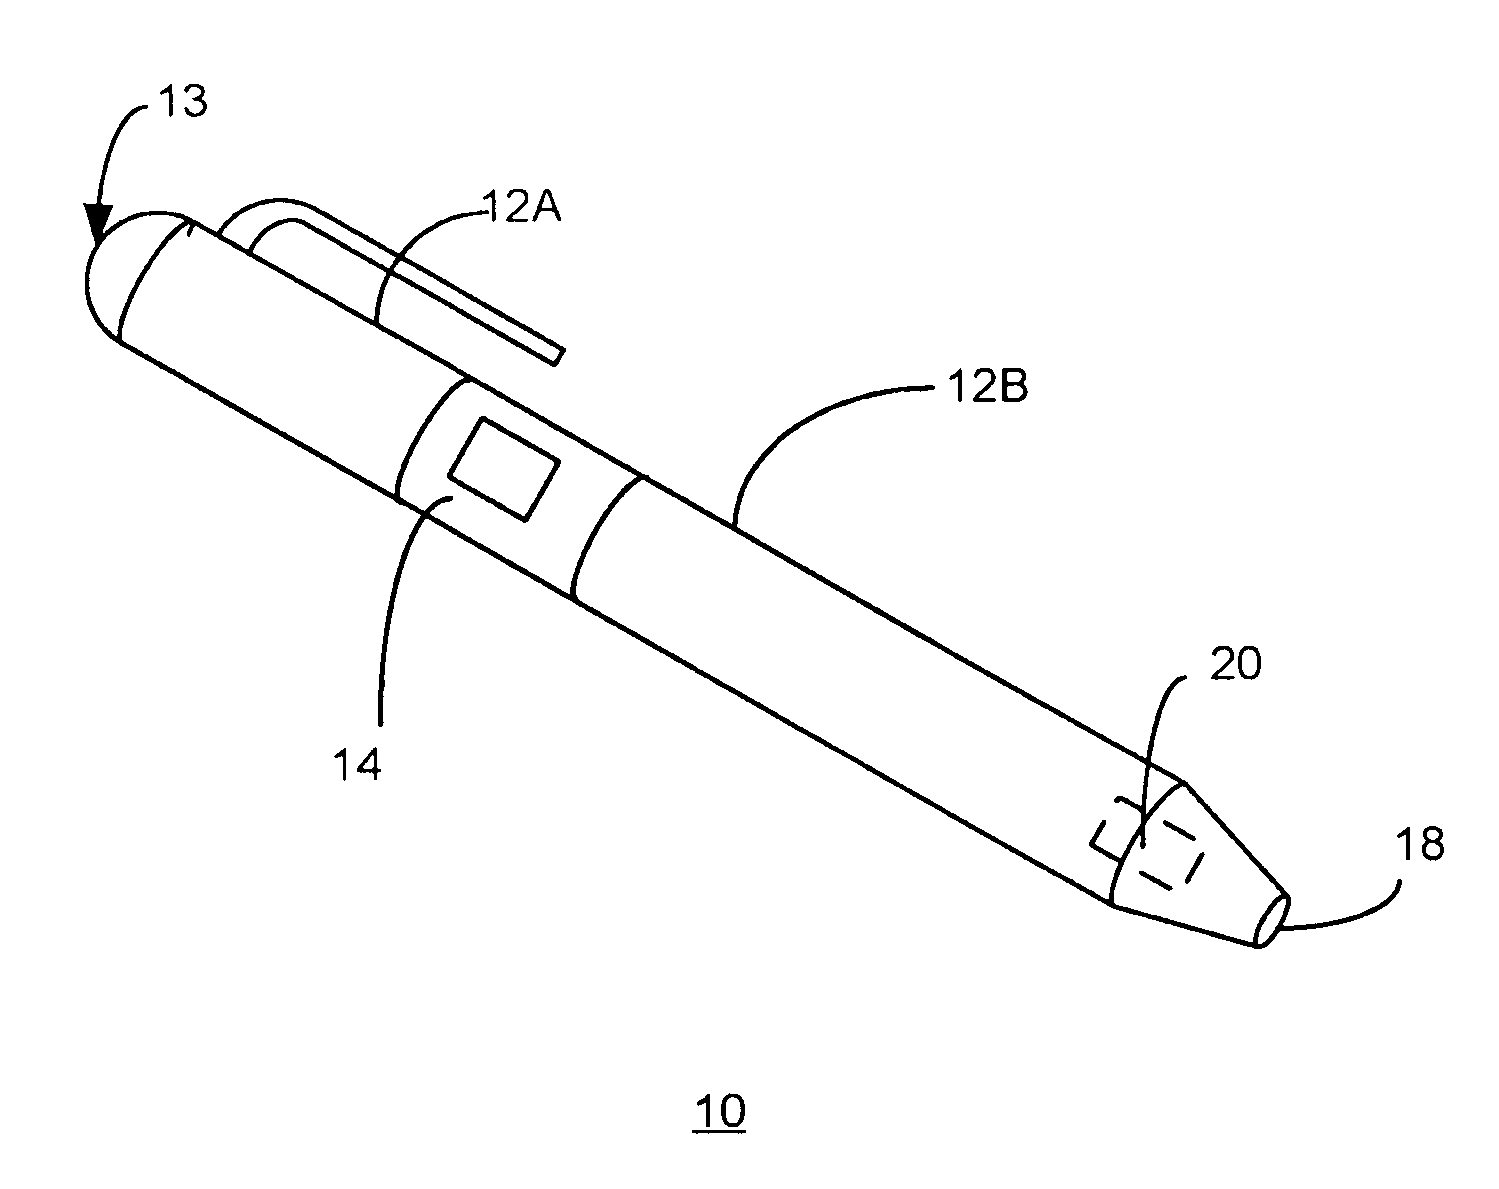 Electronic pens with dynamic features